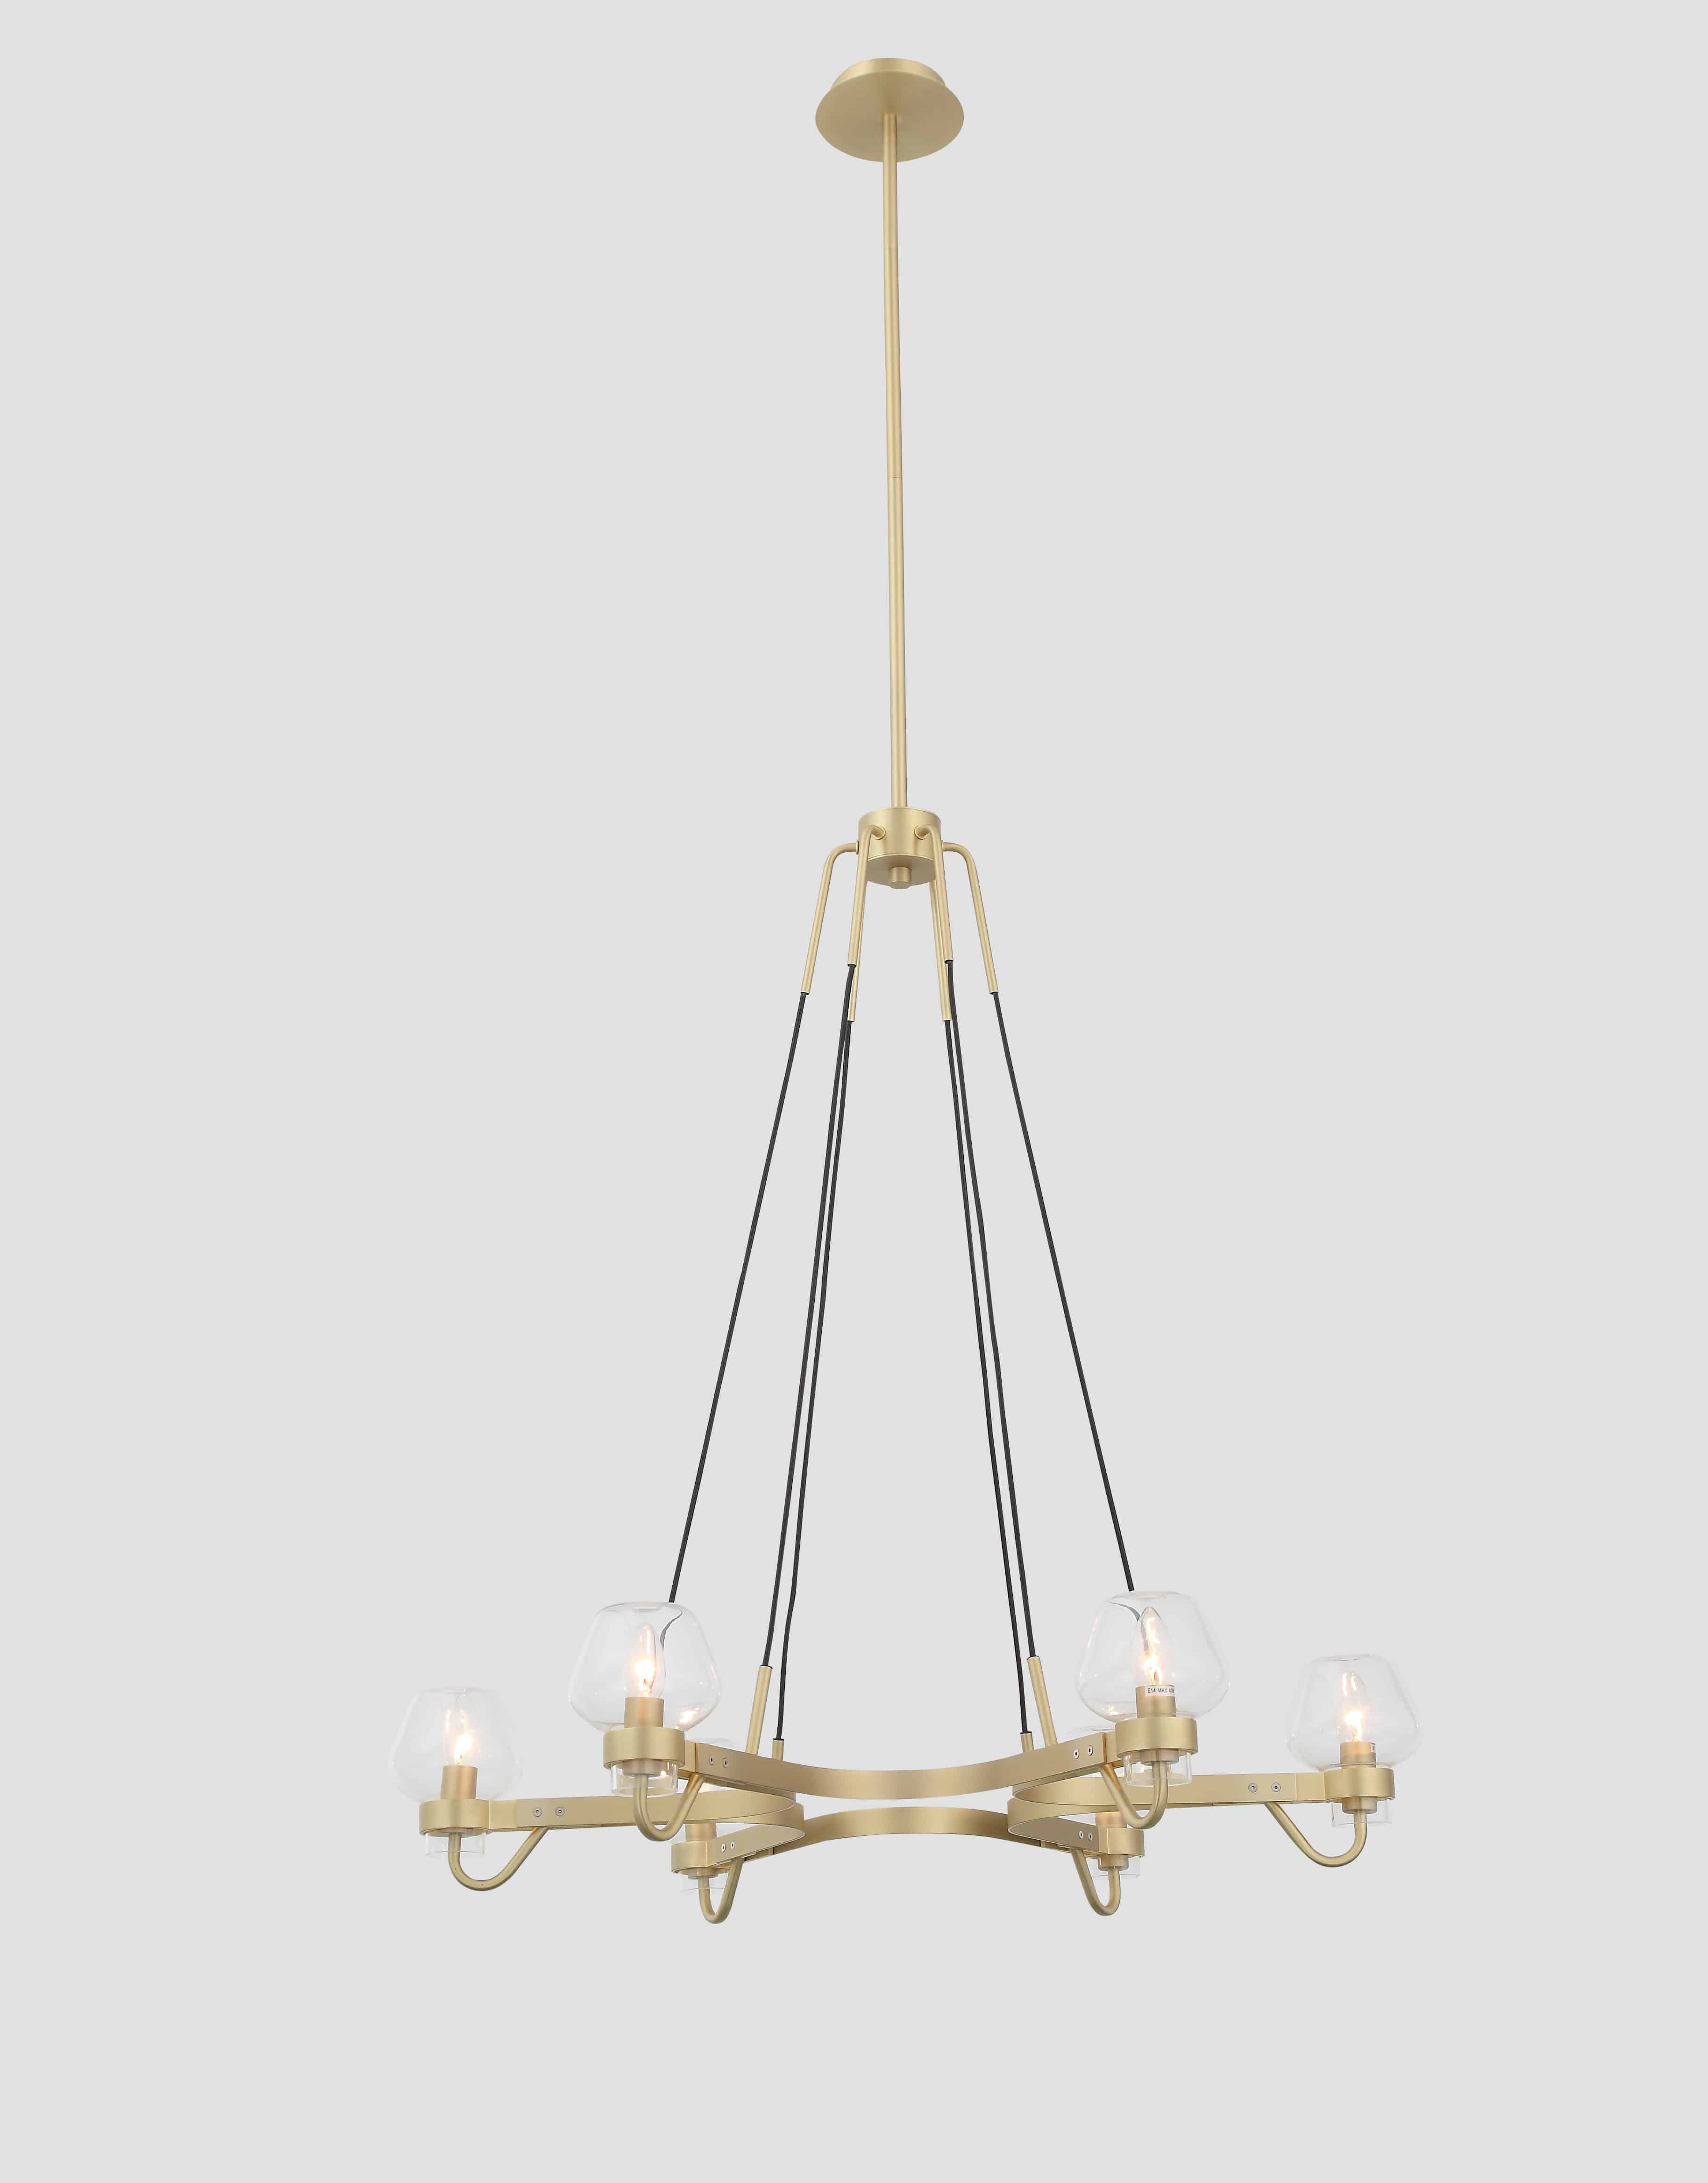 Green Tech Solutions Co w.l.l. LED Lighting Store, Handmade Elegant LED Chandelier, Made in EU. ... Handmade Elegant LED Chandelier, Made in EU. Official Exclusive Distributor in Kuwait.